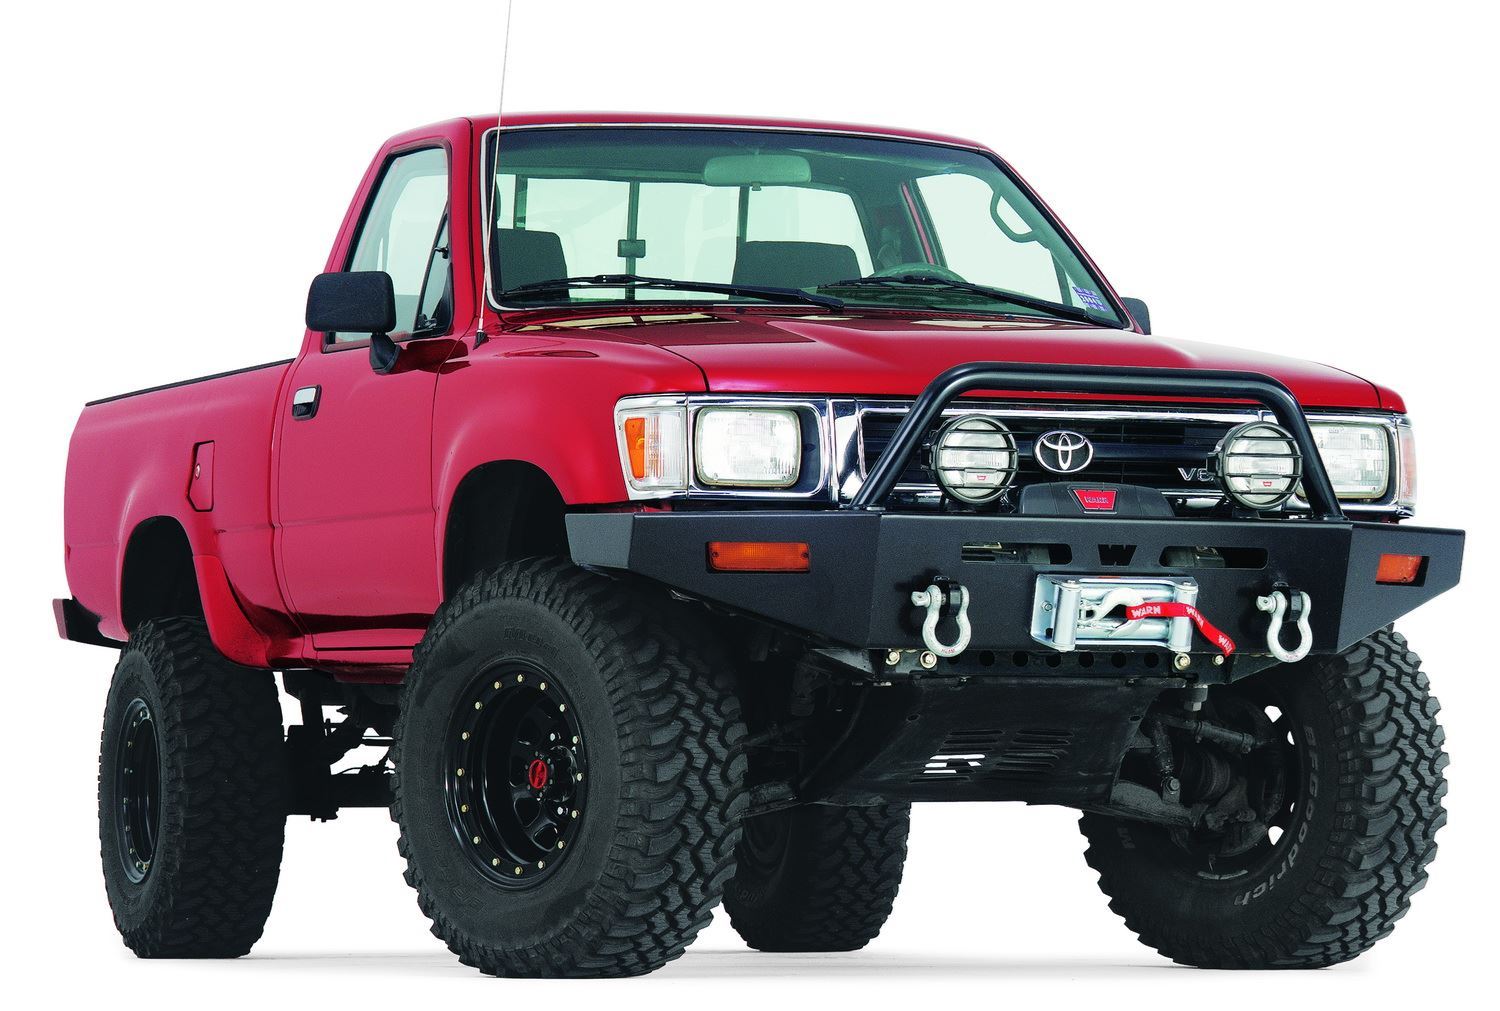 68450 Rock Crawler Front Bumper for 1989-1995 Toyota Truck